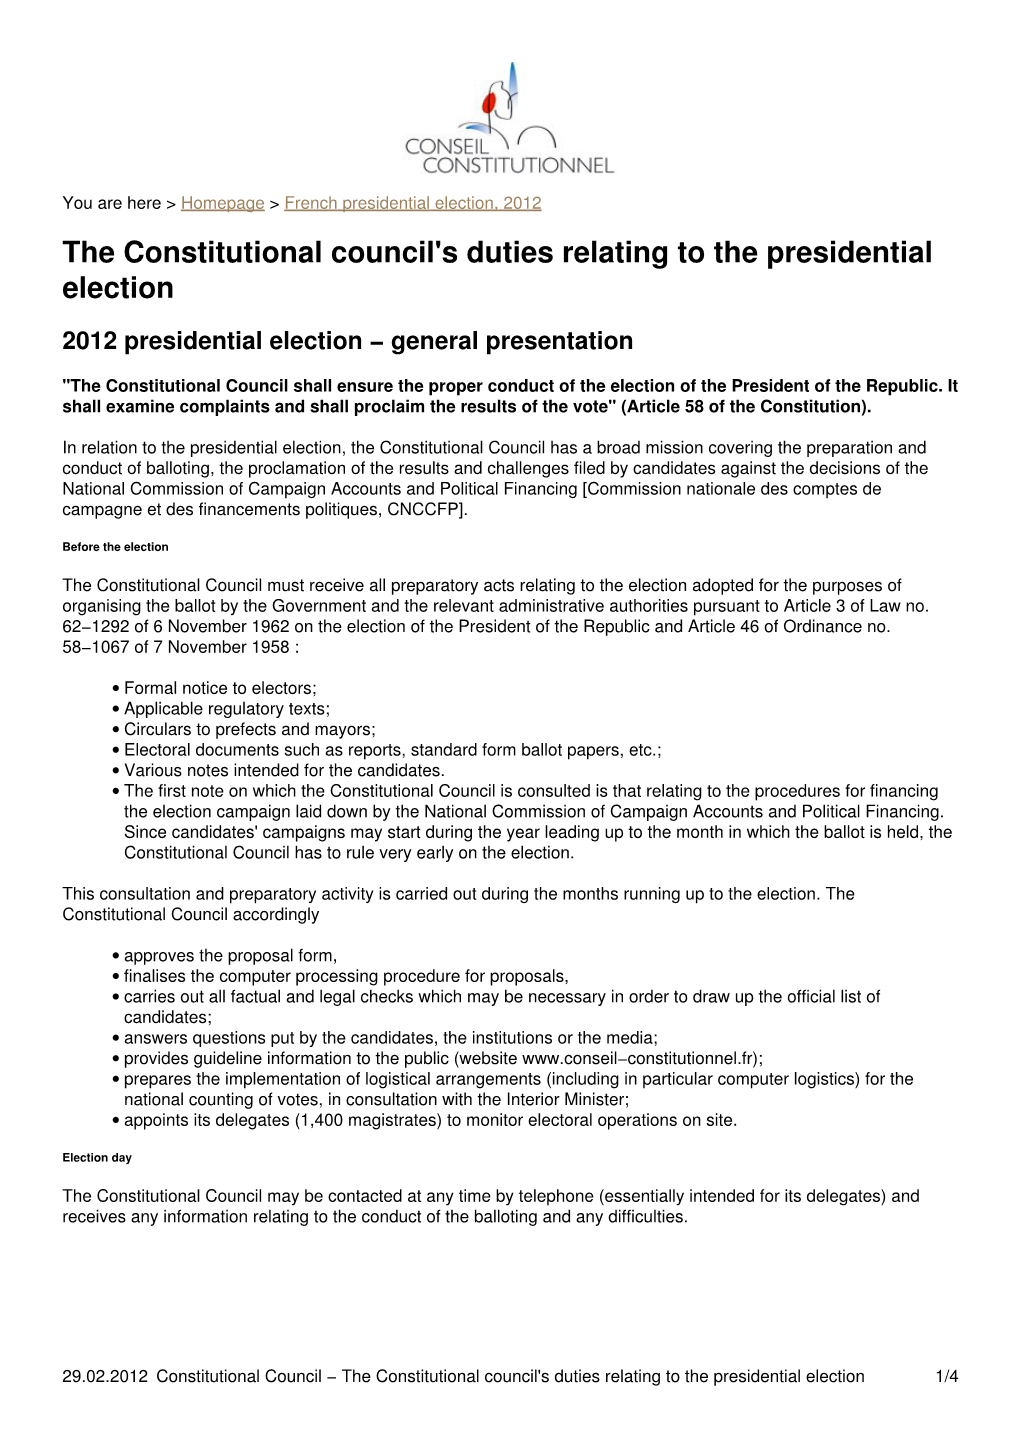 The Constitutional Council's Duties Relating to the Presidential Election